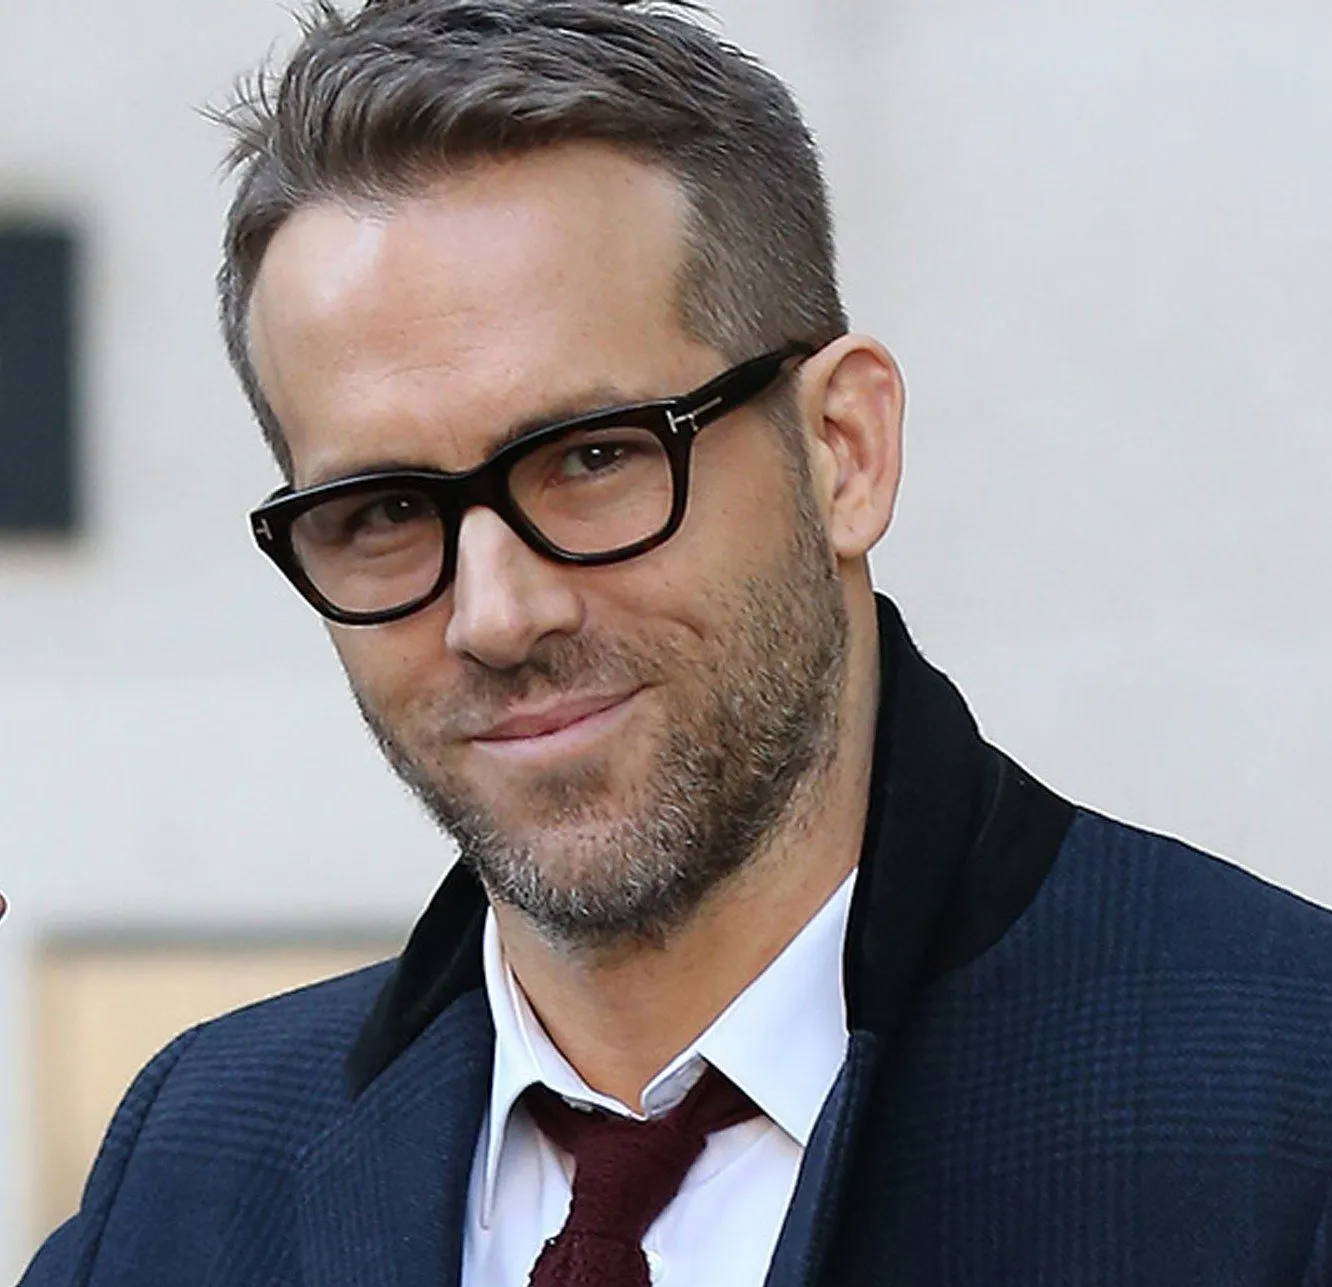 Ryan Reynolds wearing a blue coat, white shirt, red tie and thick frame glasses